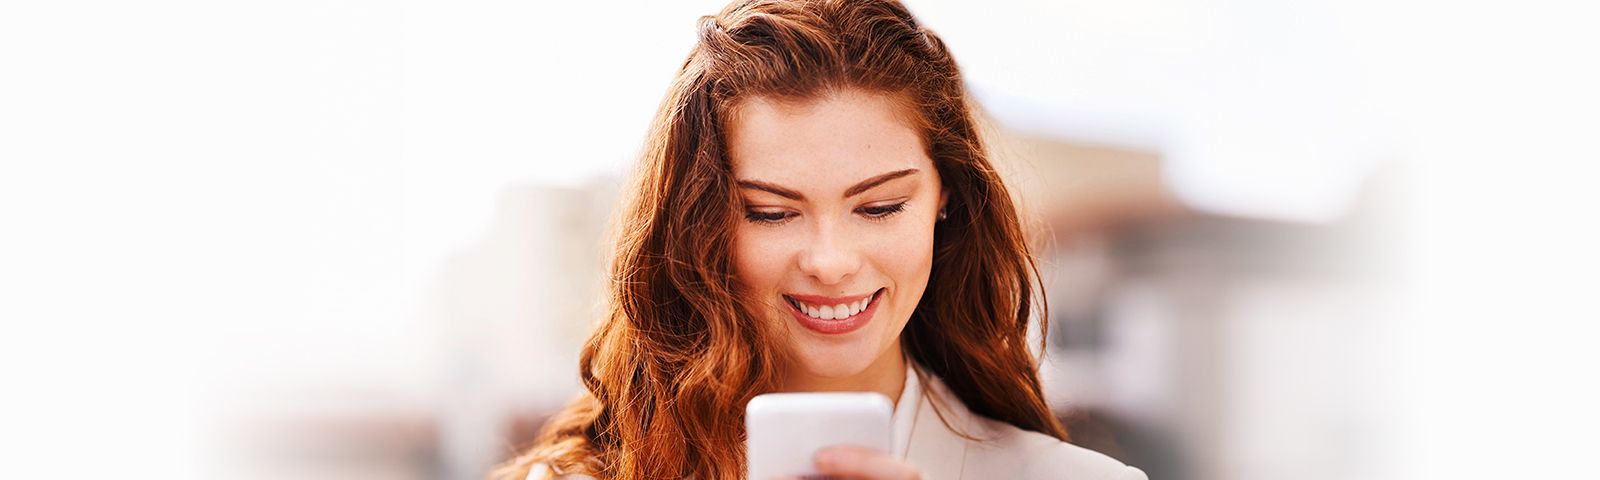 Beautiful woman checking out a professional dating site on her smartphone